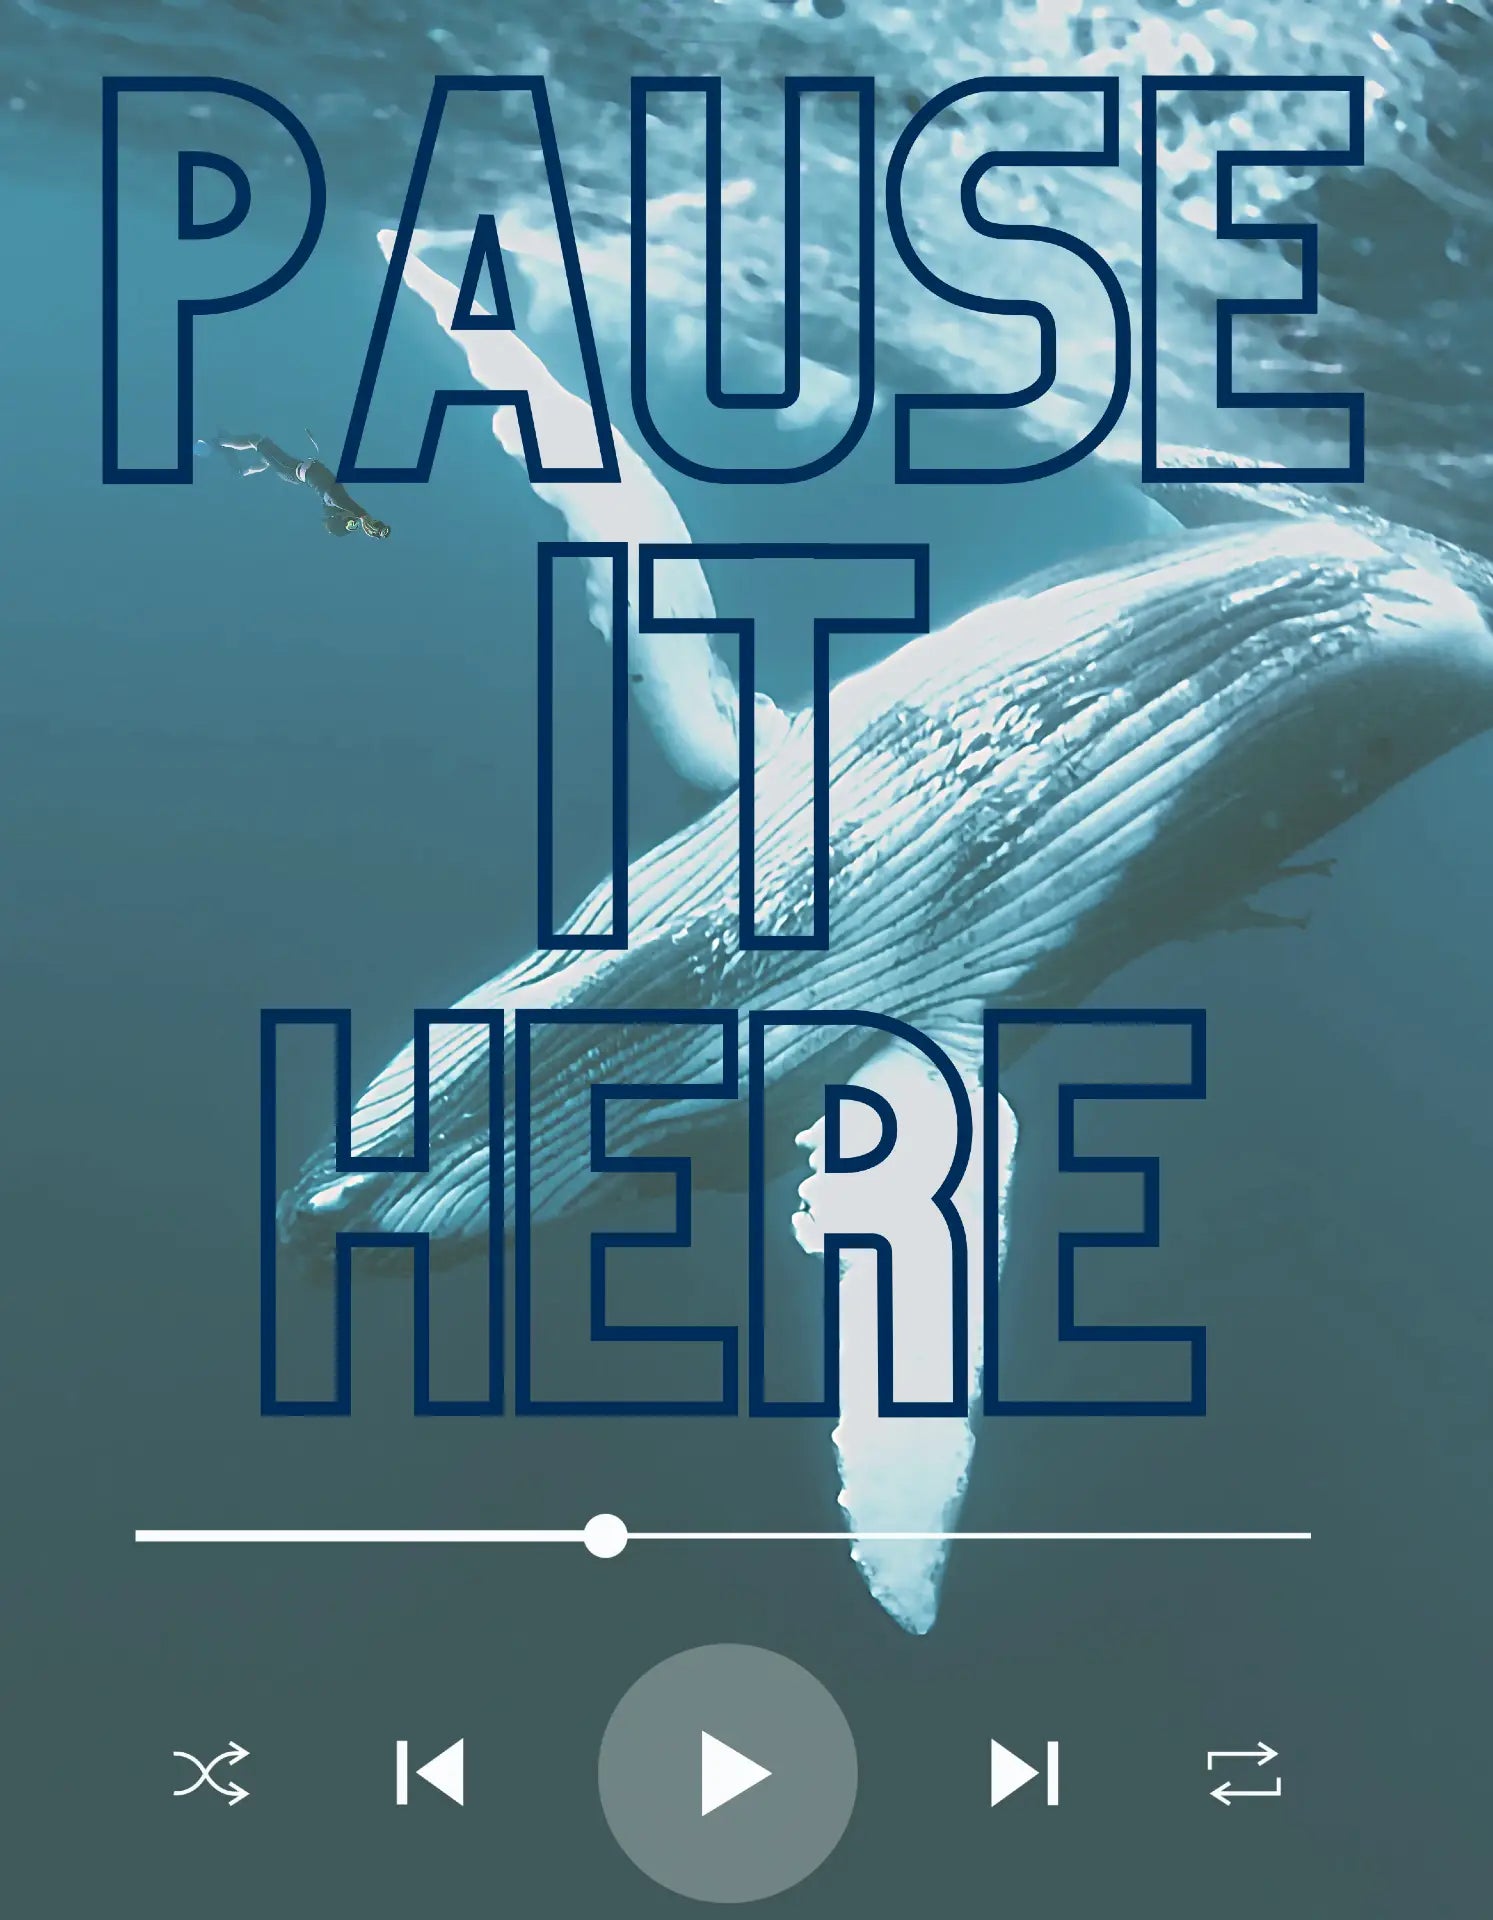 blue whale pause it here t-shirt man